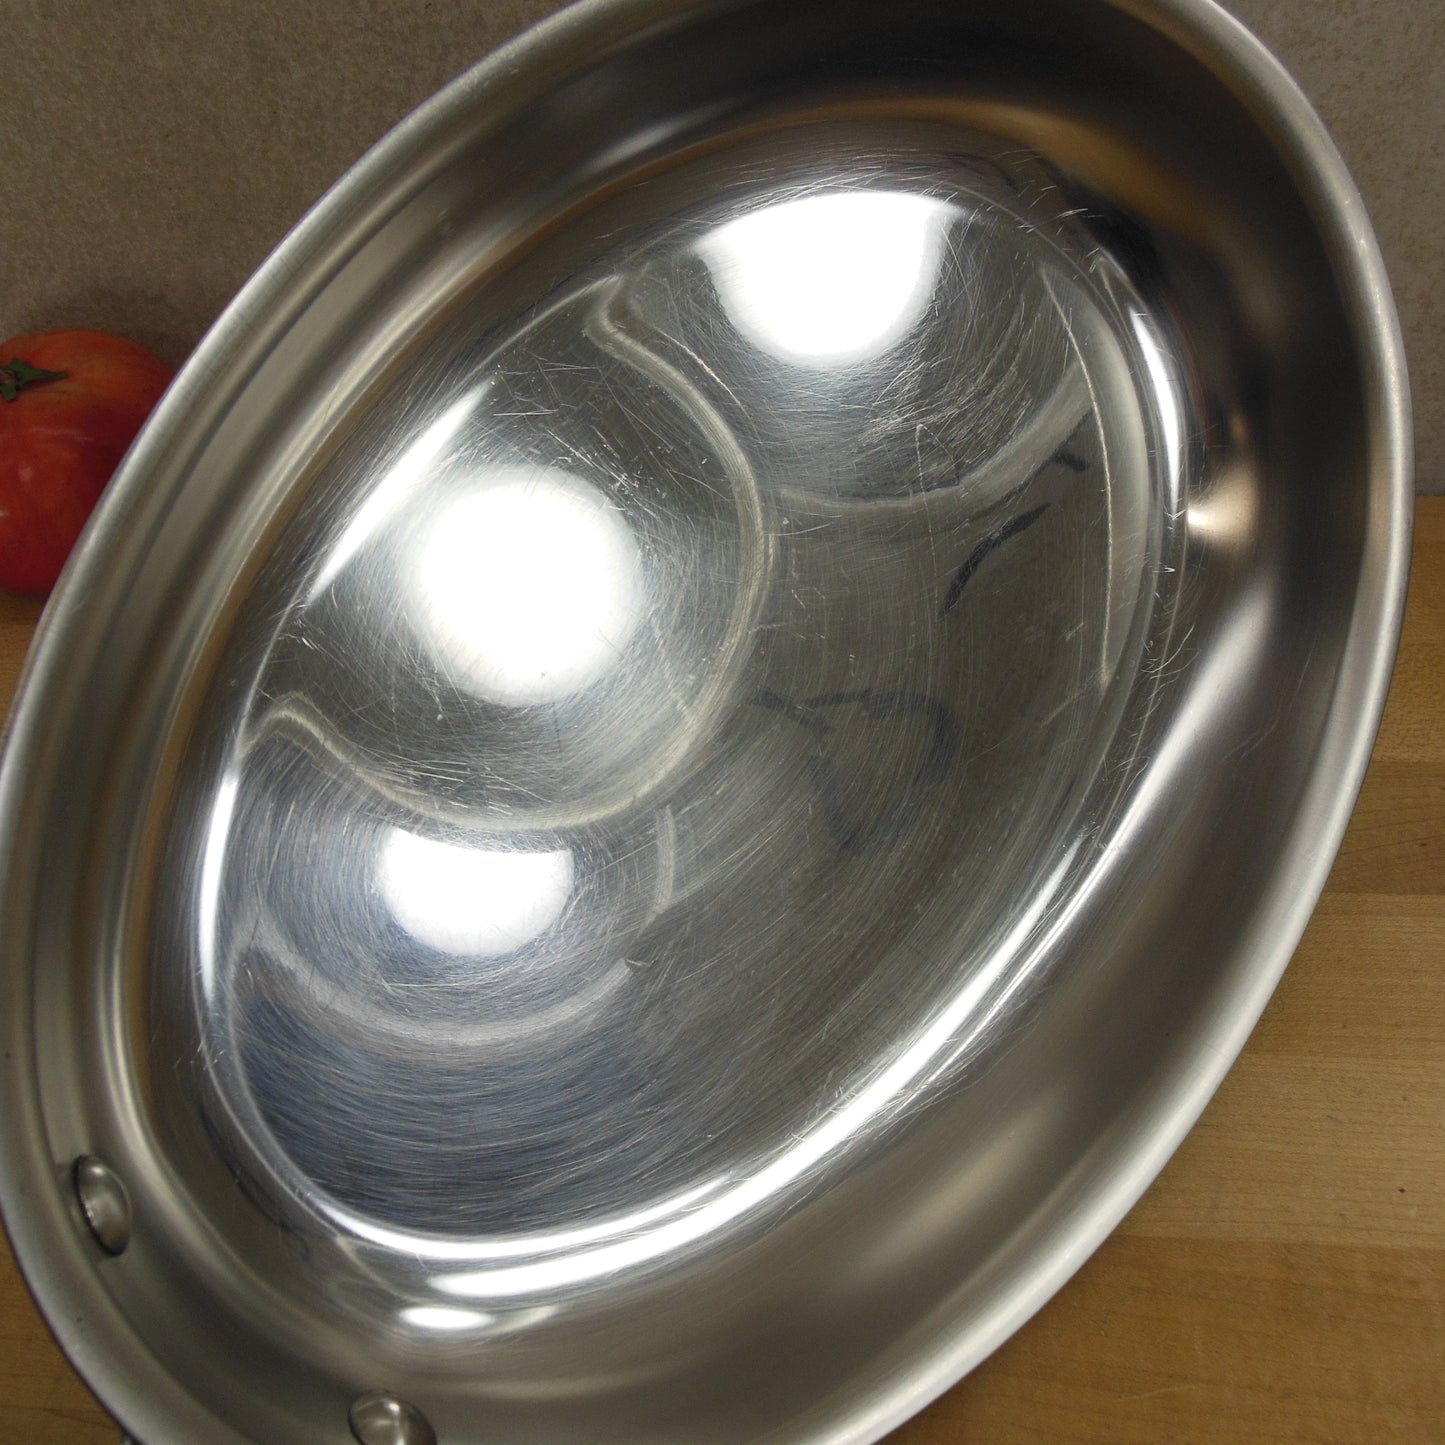 All-Clad Ltd. USA Anodized Stainless Oval Fish Omelet Fry Pan Skillet Interior